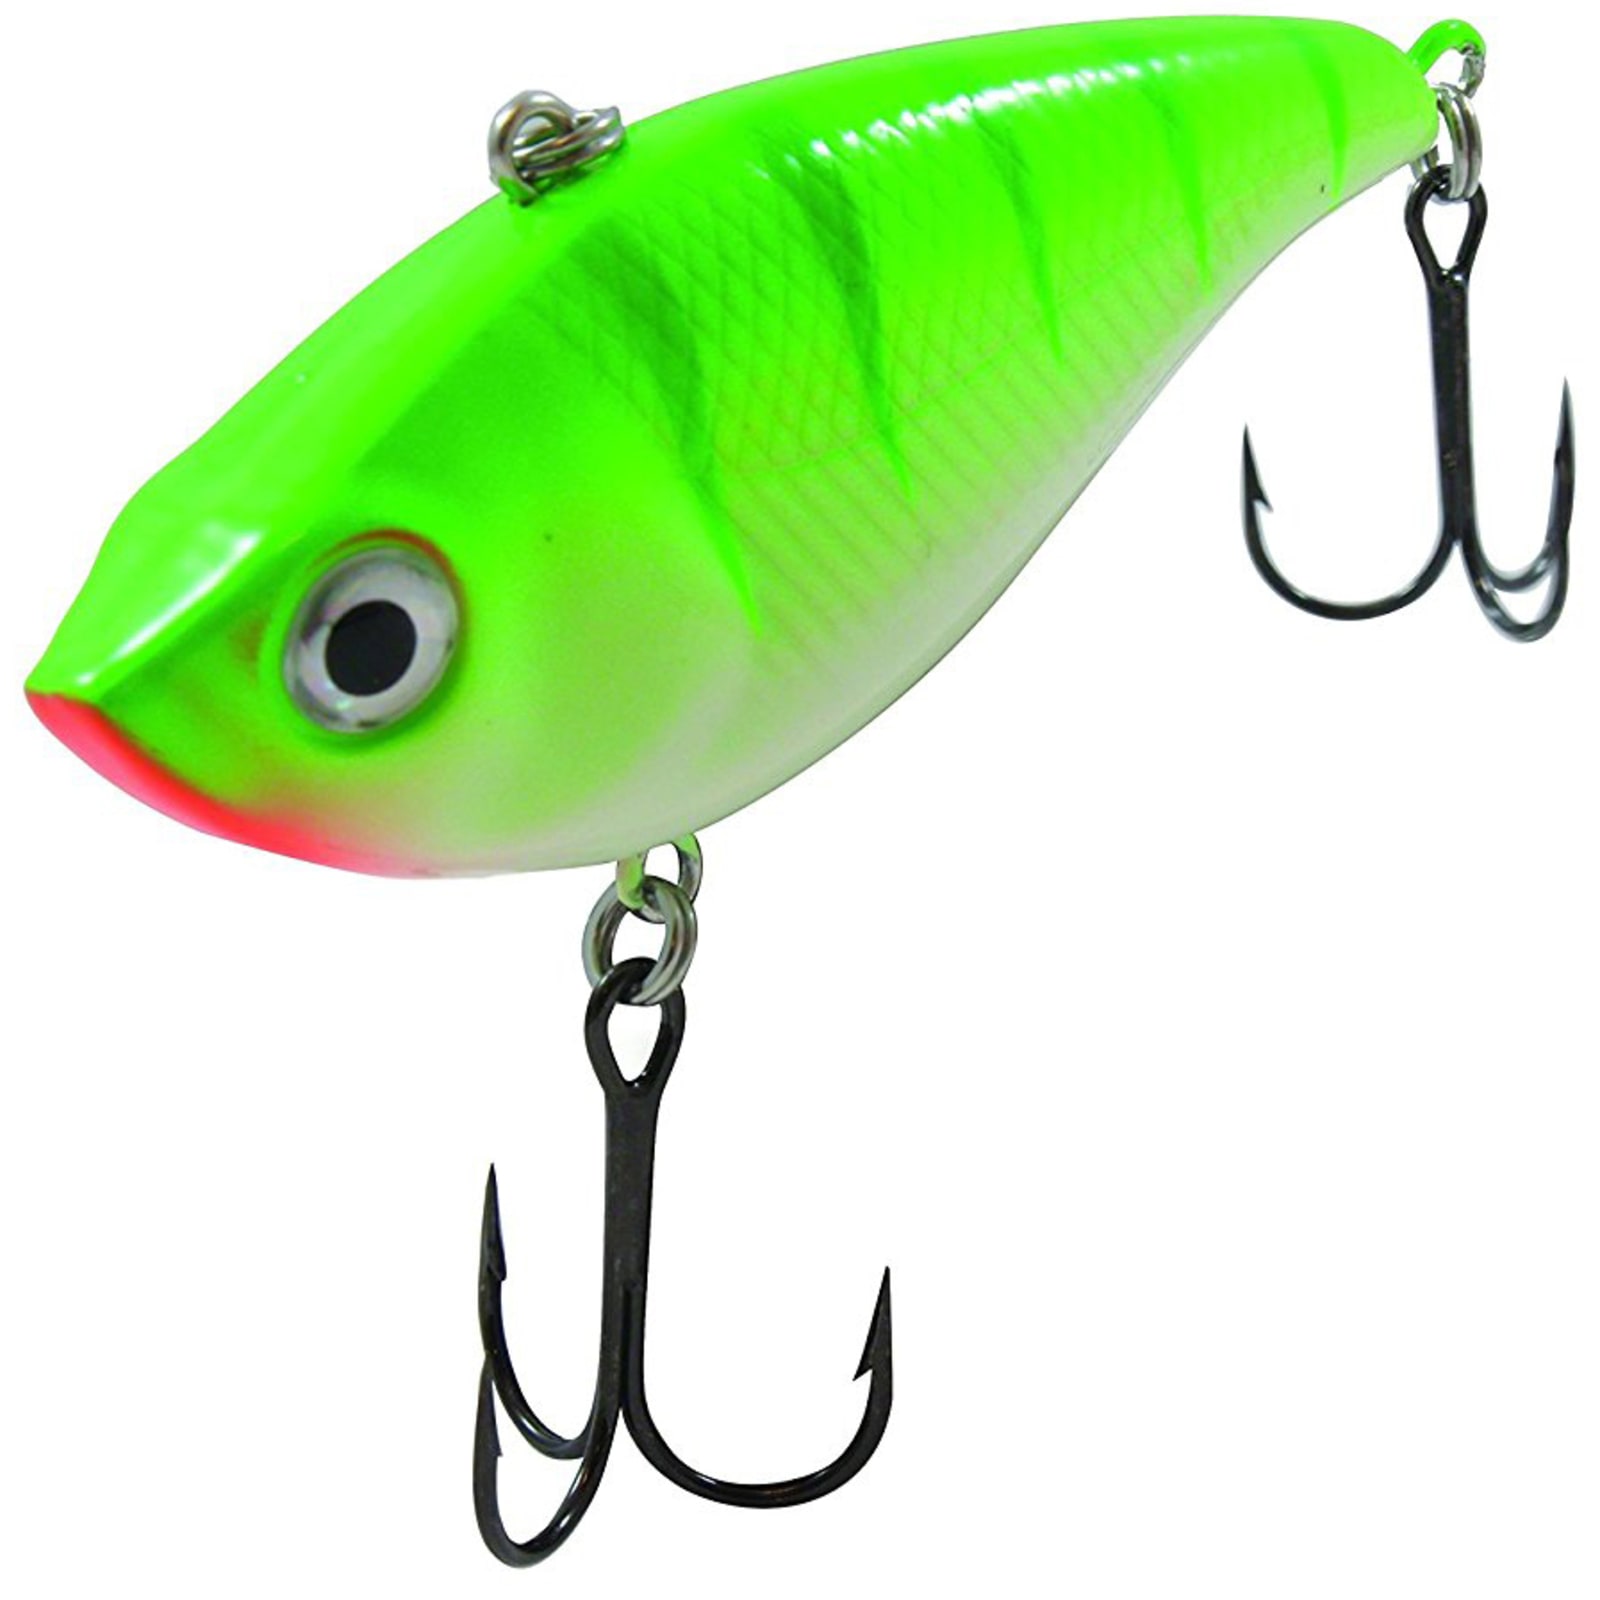 Glo Perch Rippin' Shad Ice Fishing Lure by Northland at Fleet Farm